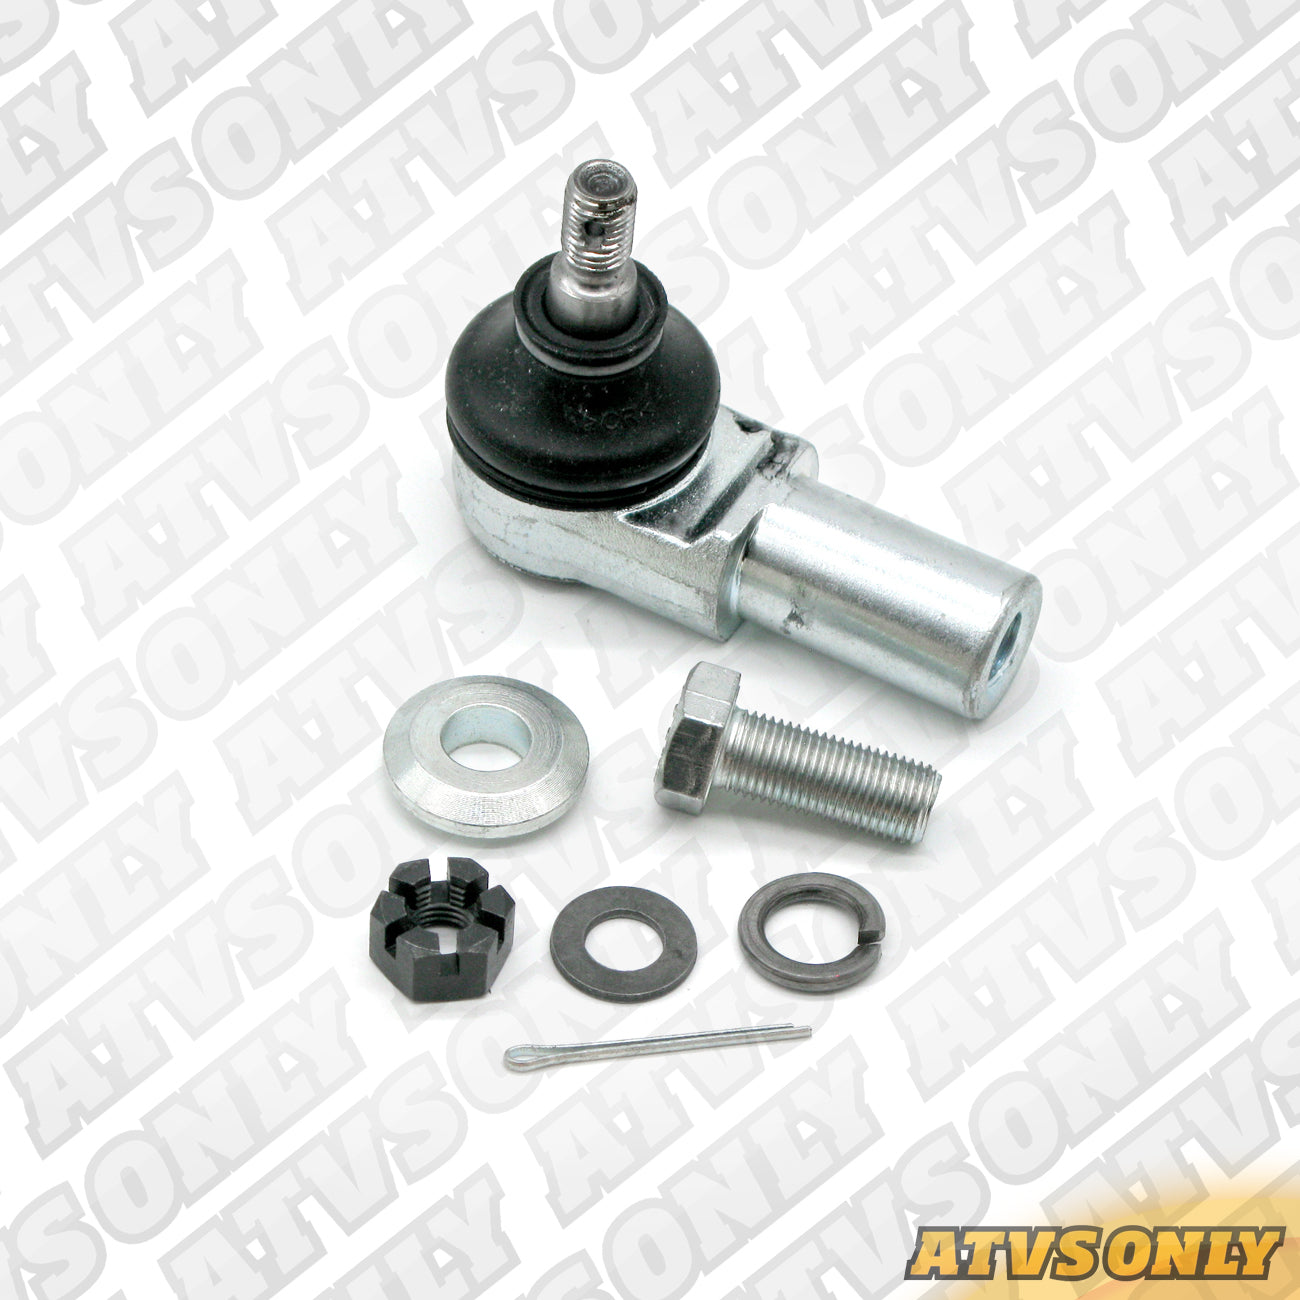 A-Arm Ball Joint (Laeger/Omni – Lower/Upper) for Suzuki LTR450